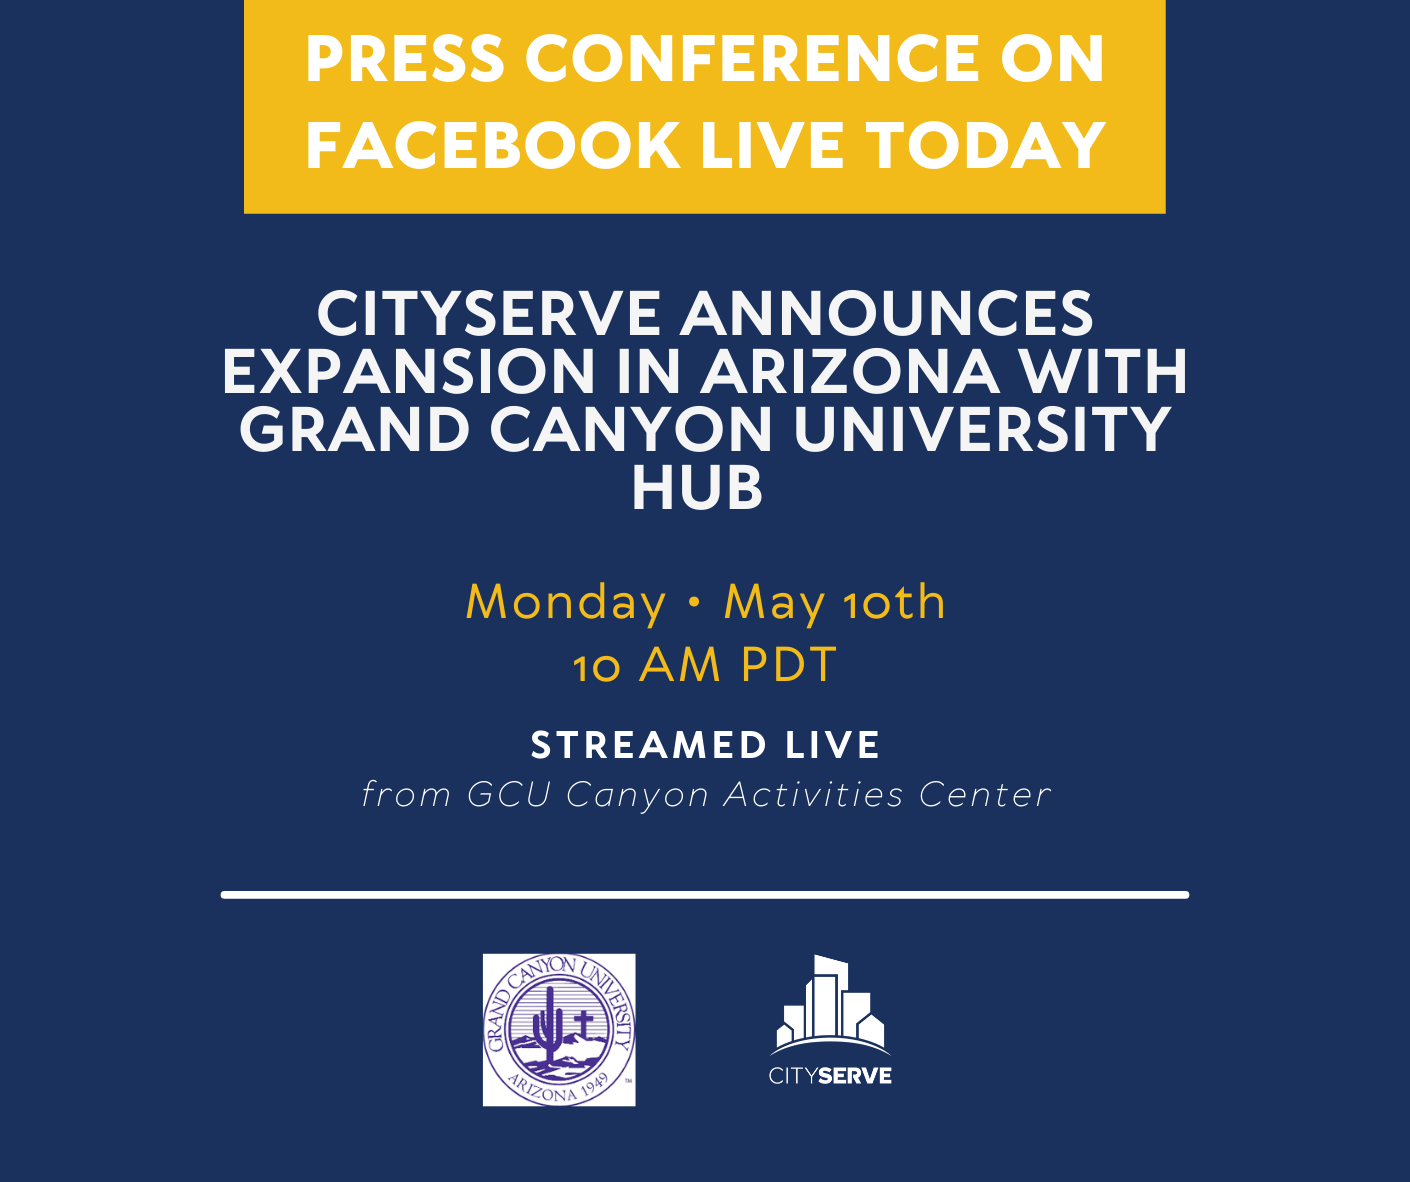 Grand Canyon University and CityServe launched the first CityServe HUB in Arizona at Grand Canyon University campus to help people in need.